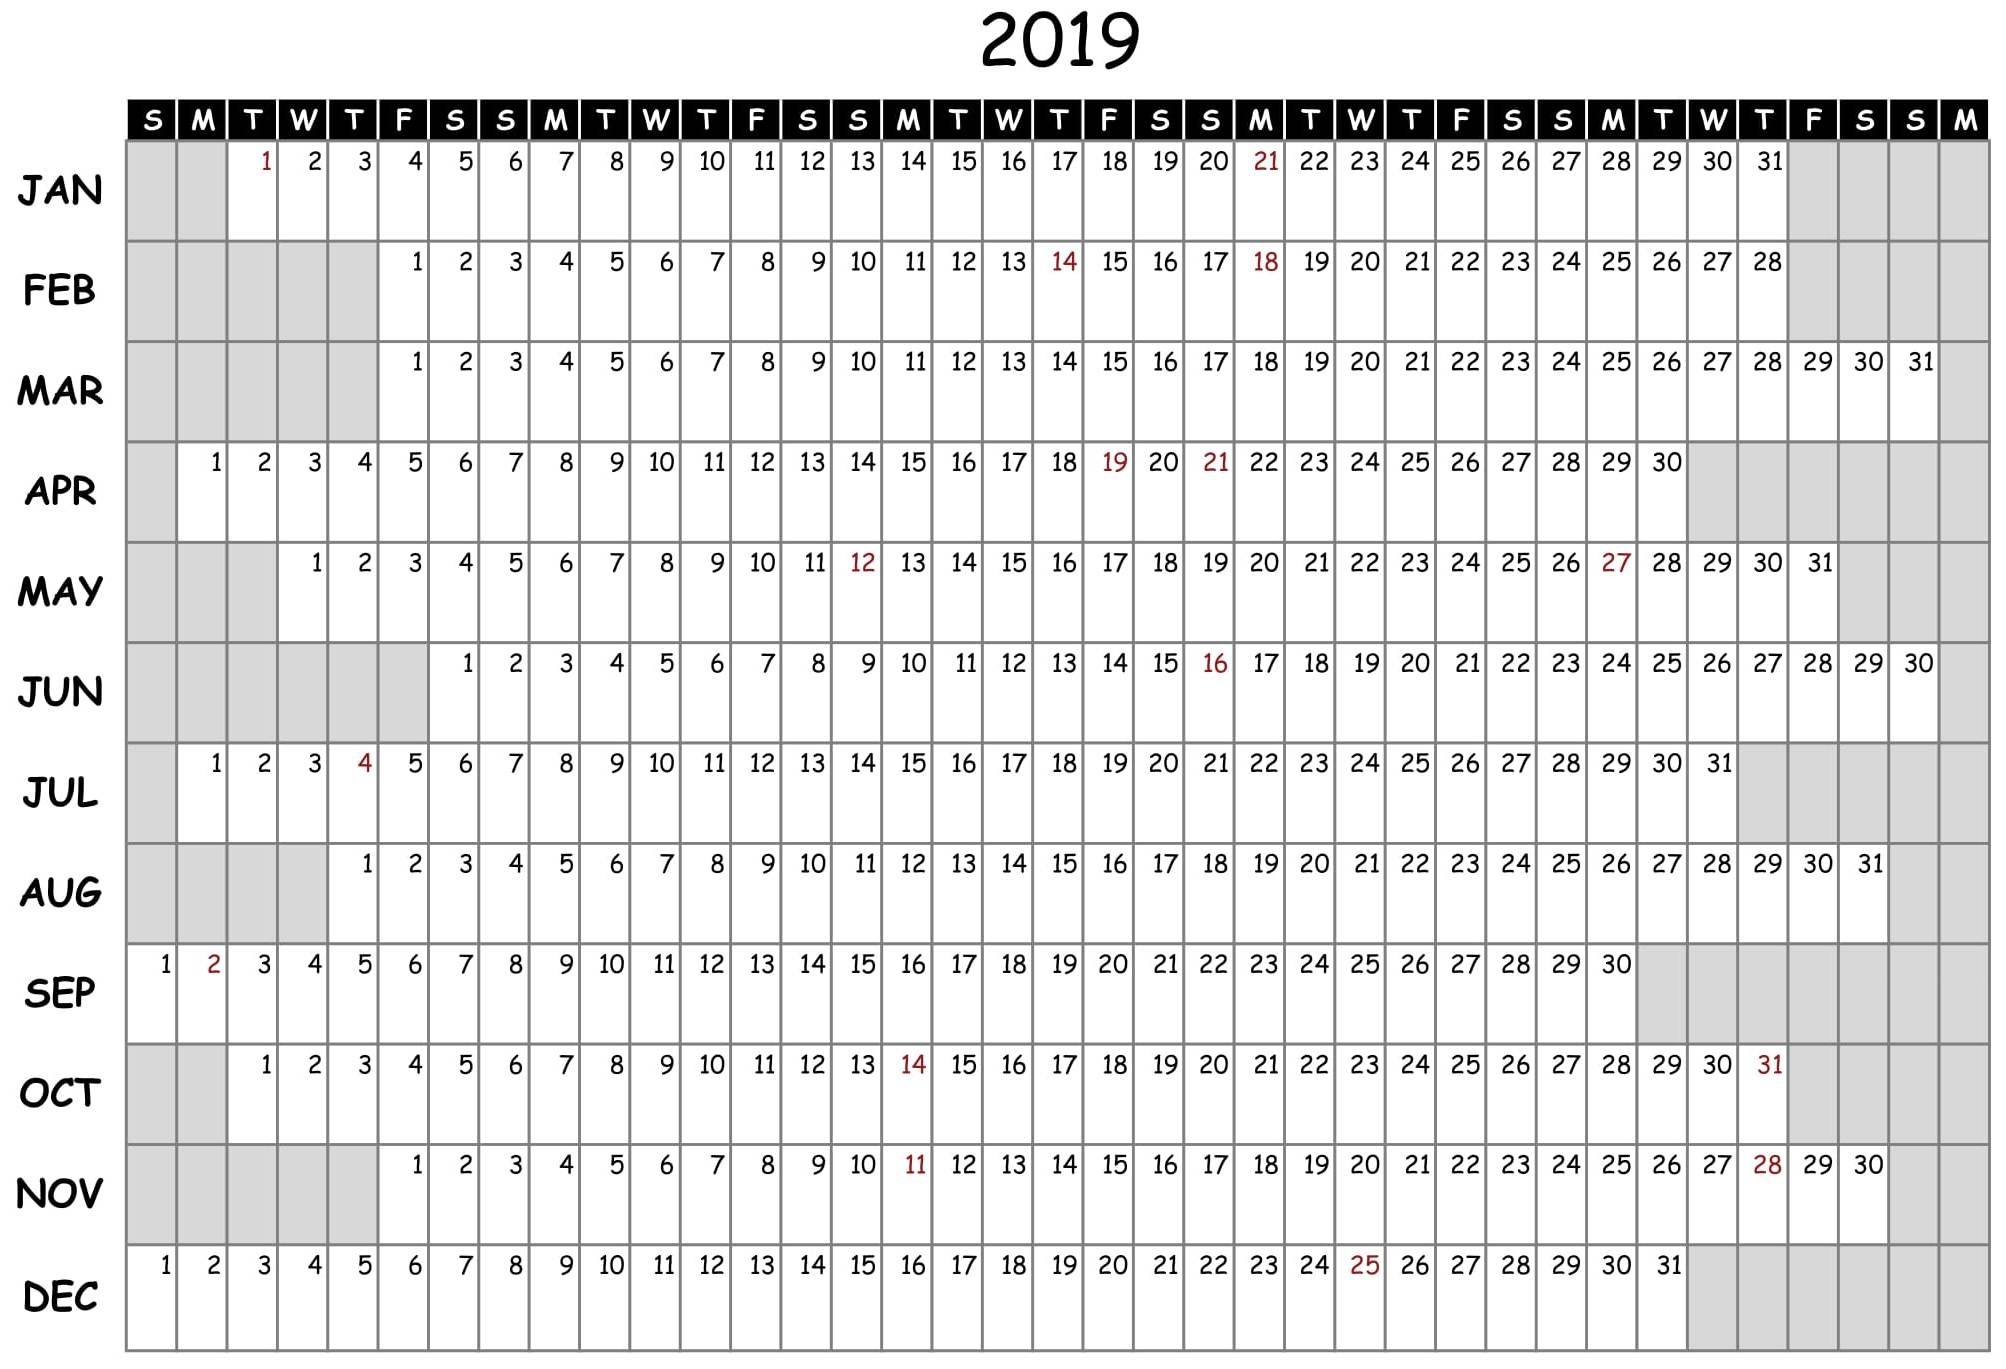 2019 Yearly Attendance Calendar Template – Free Calendar-Attendance Calendar Template Free